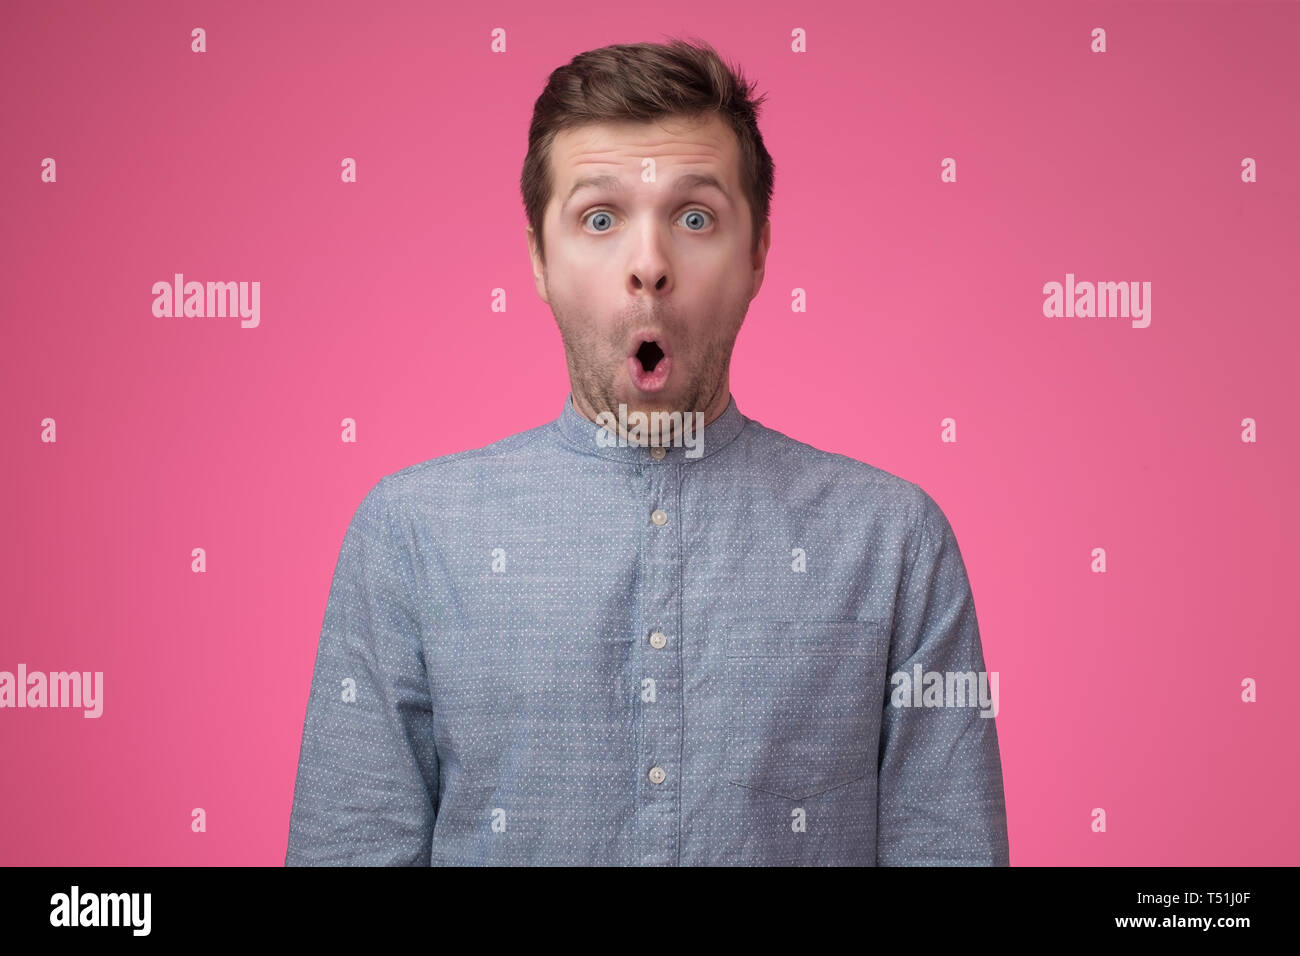 Shocked face of caucasian man in blue shirt on pink background Stock Photo